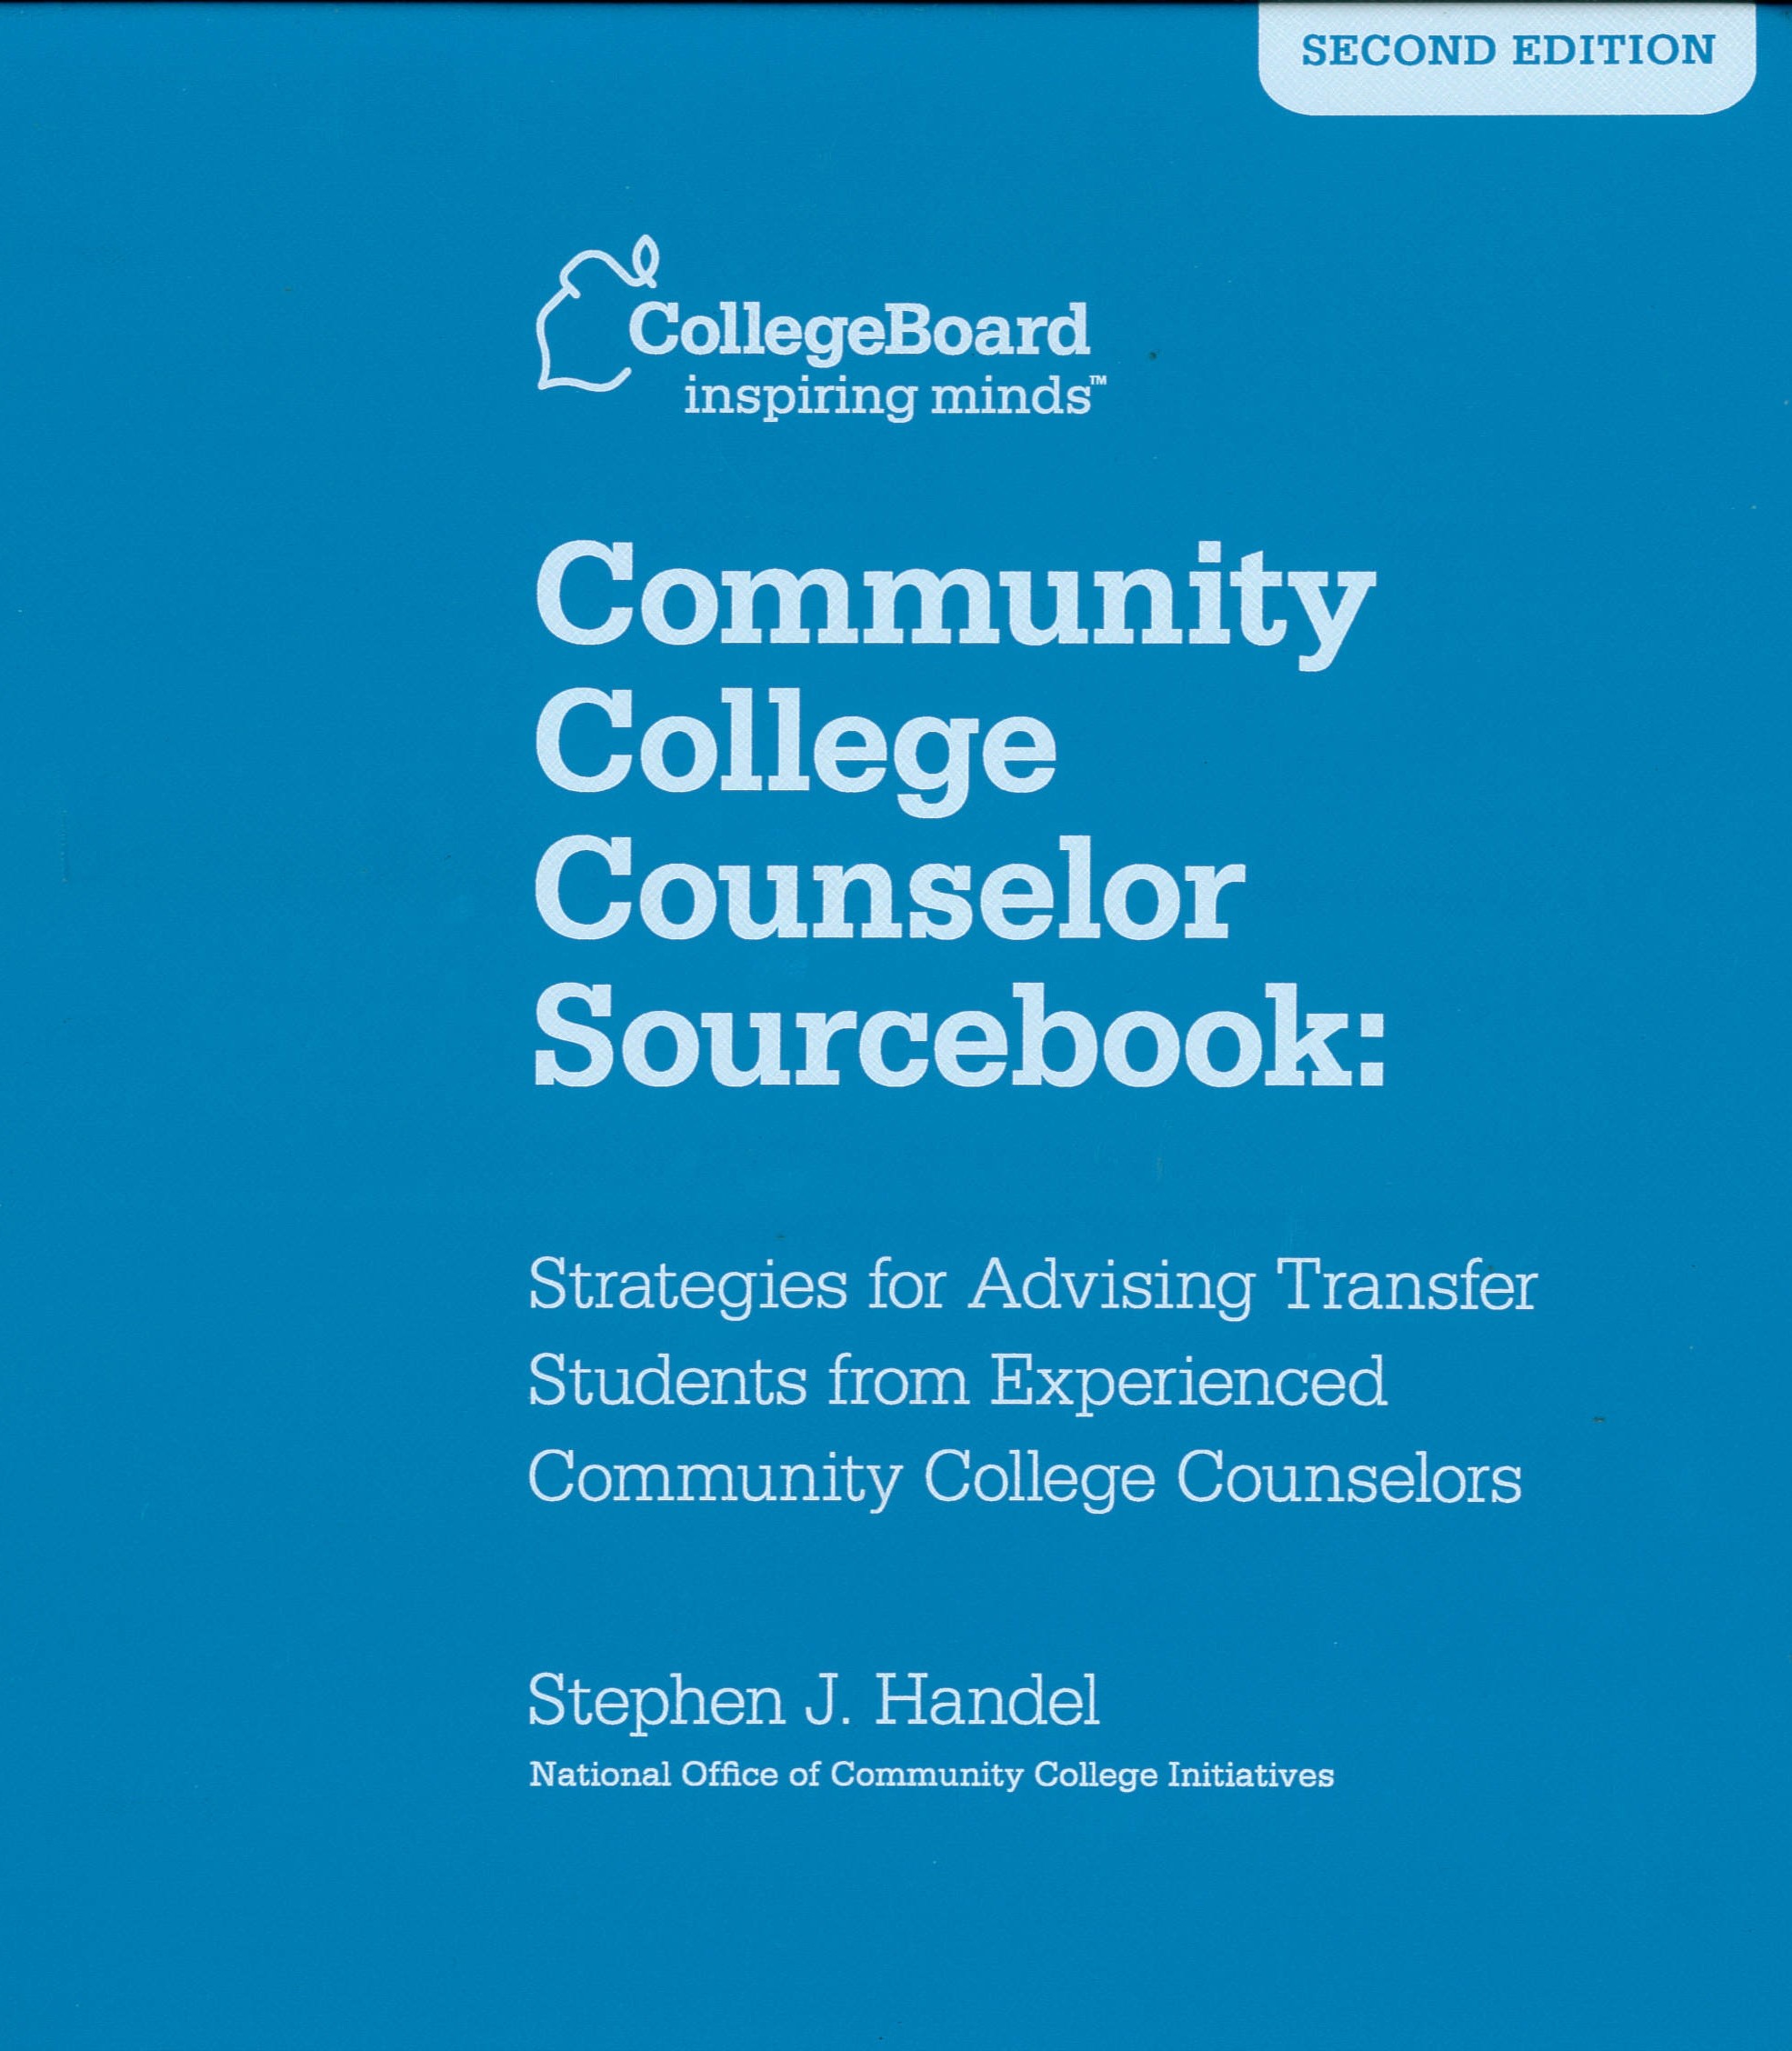 Community college counselor sourcebook : Strategies for advising transfer students from experienced community college counselors. /